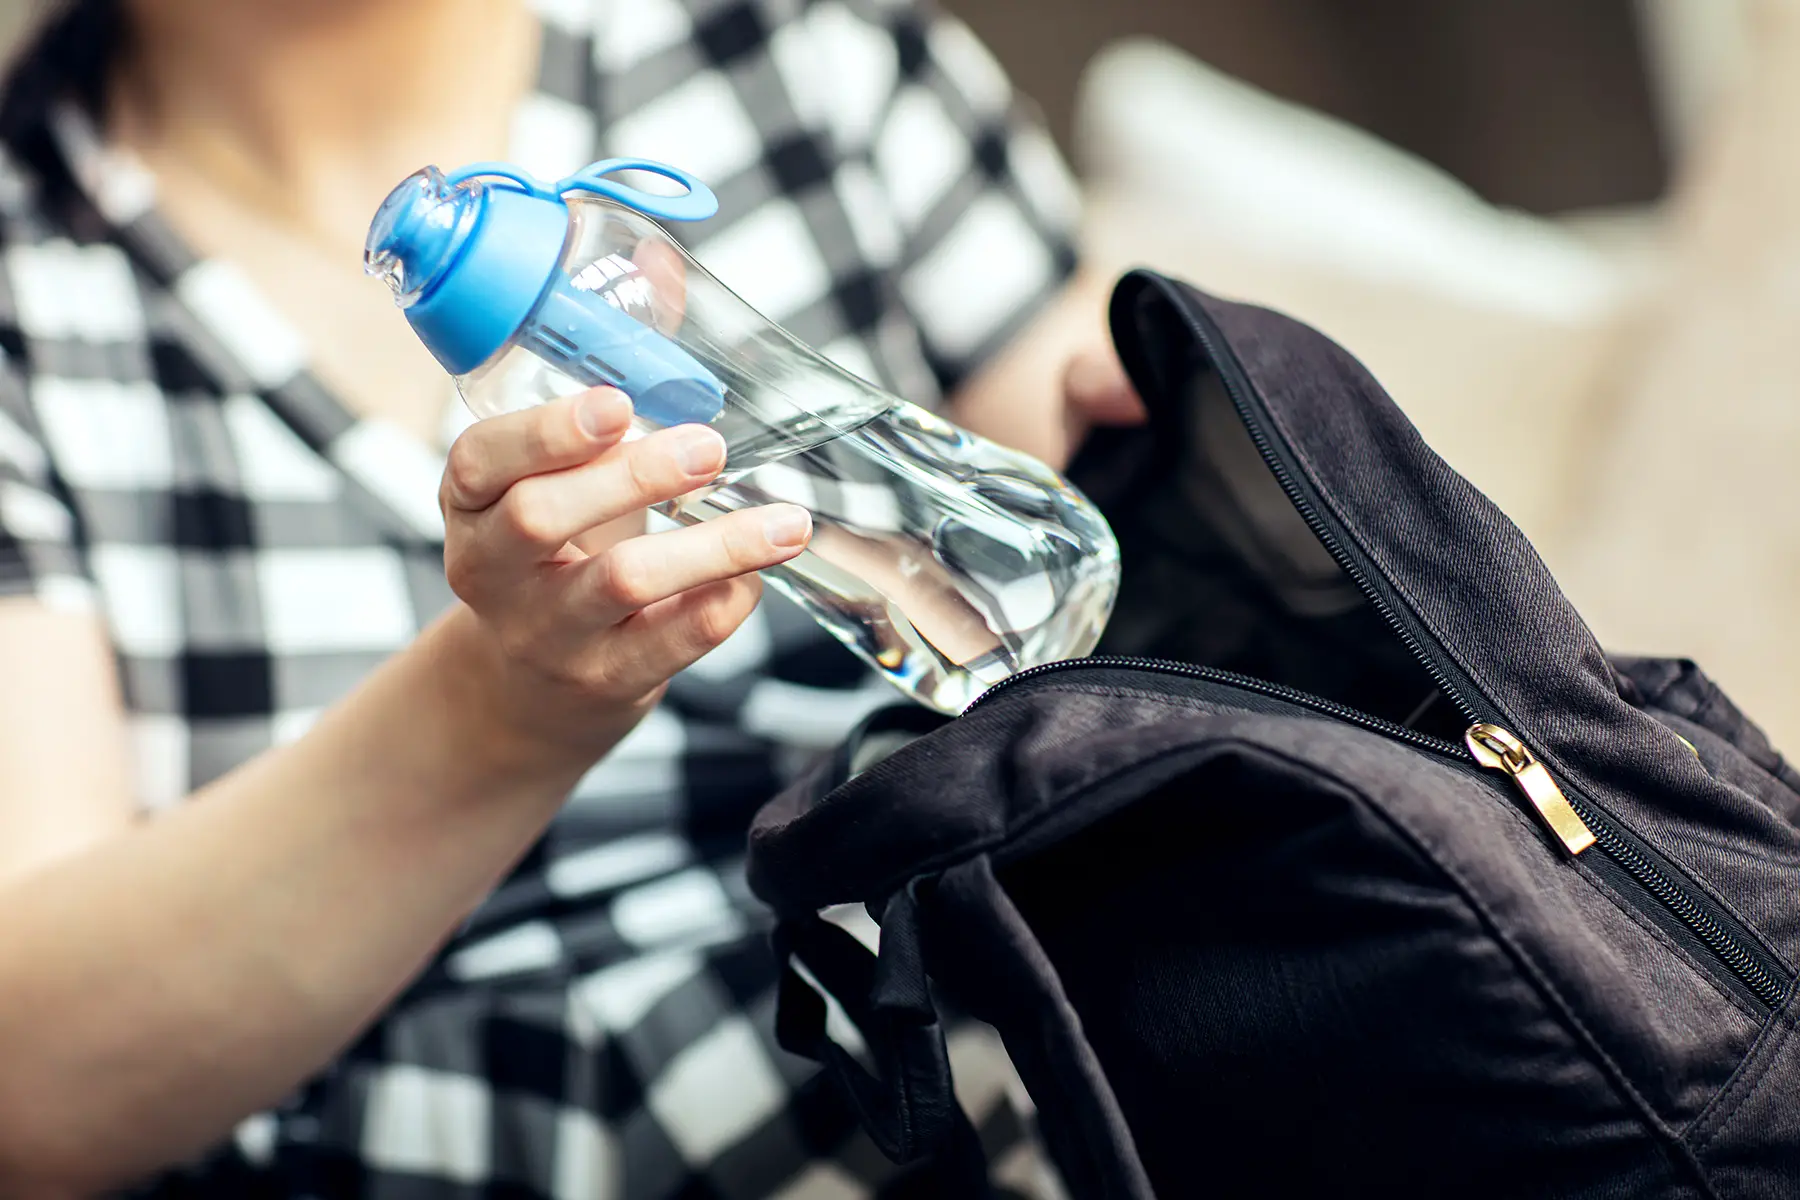 Woman putting a water bottle in her backpack